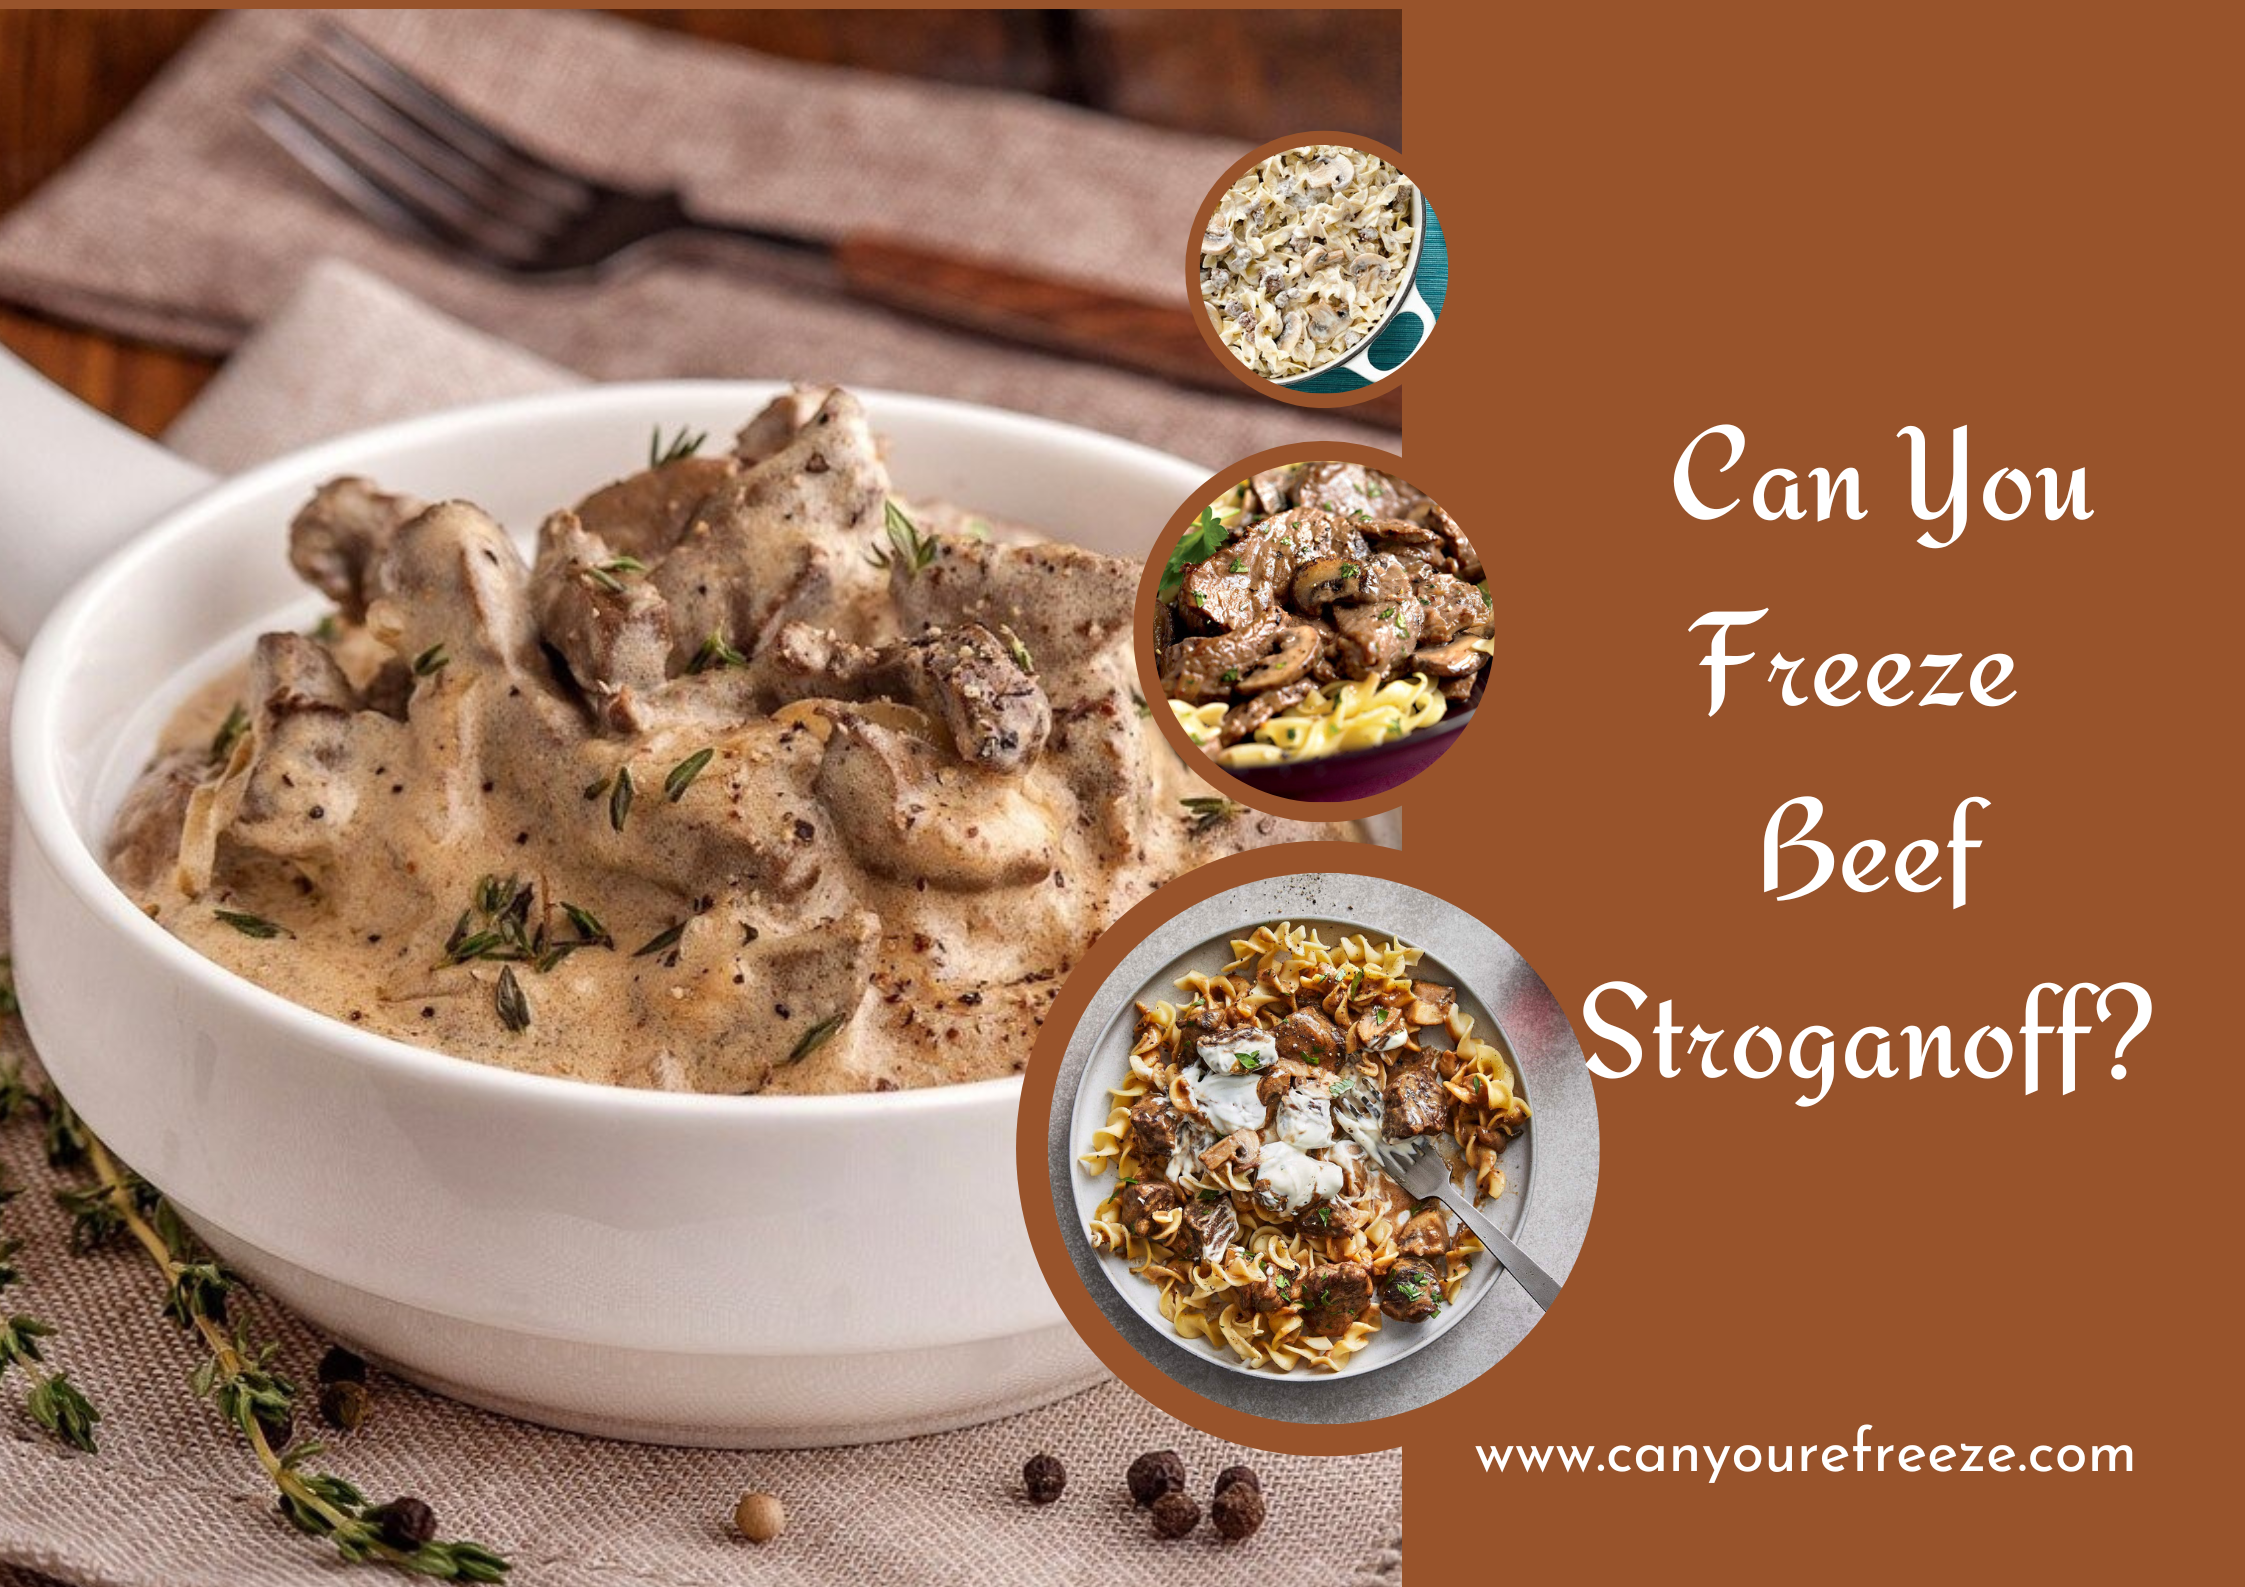 Can You Freeze Beef Stroganoff